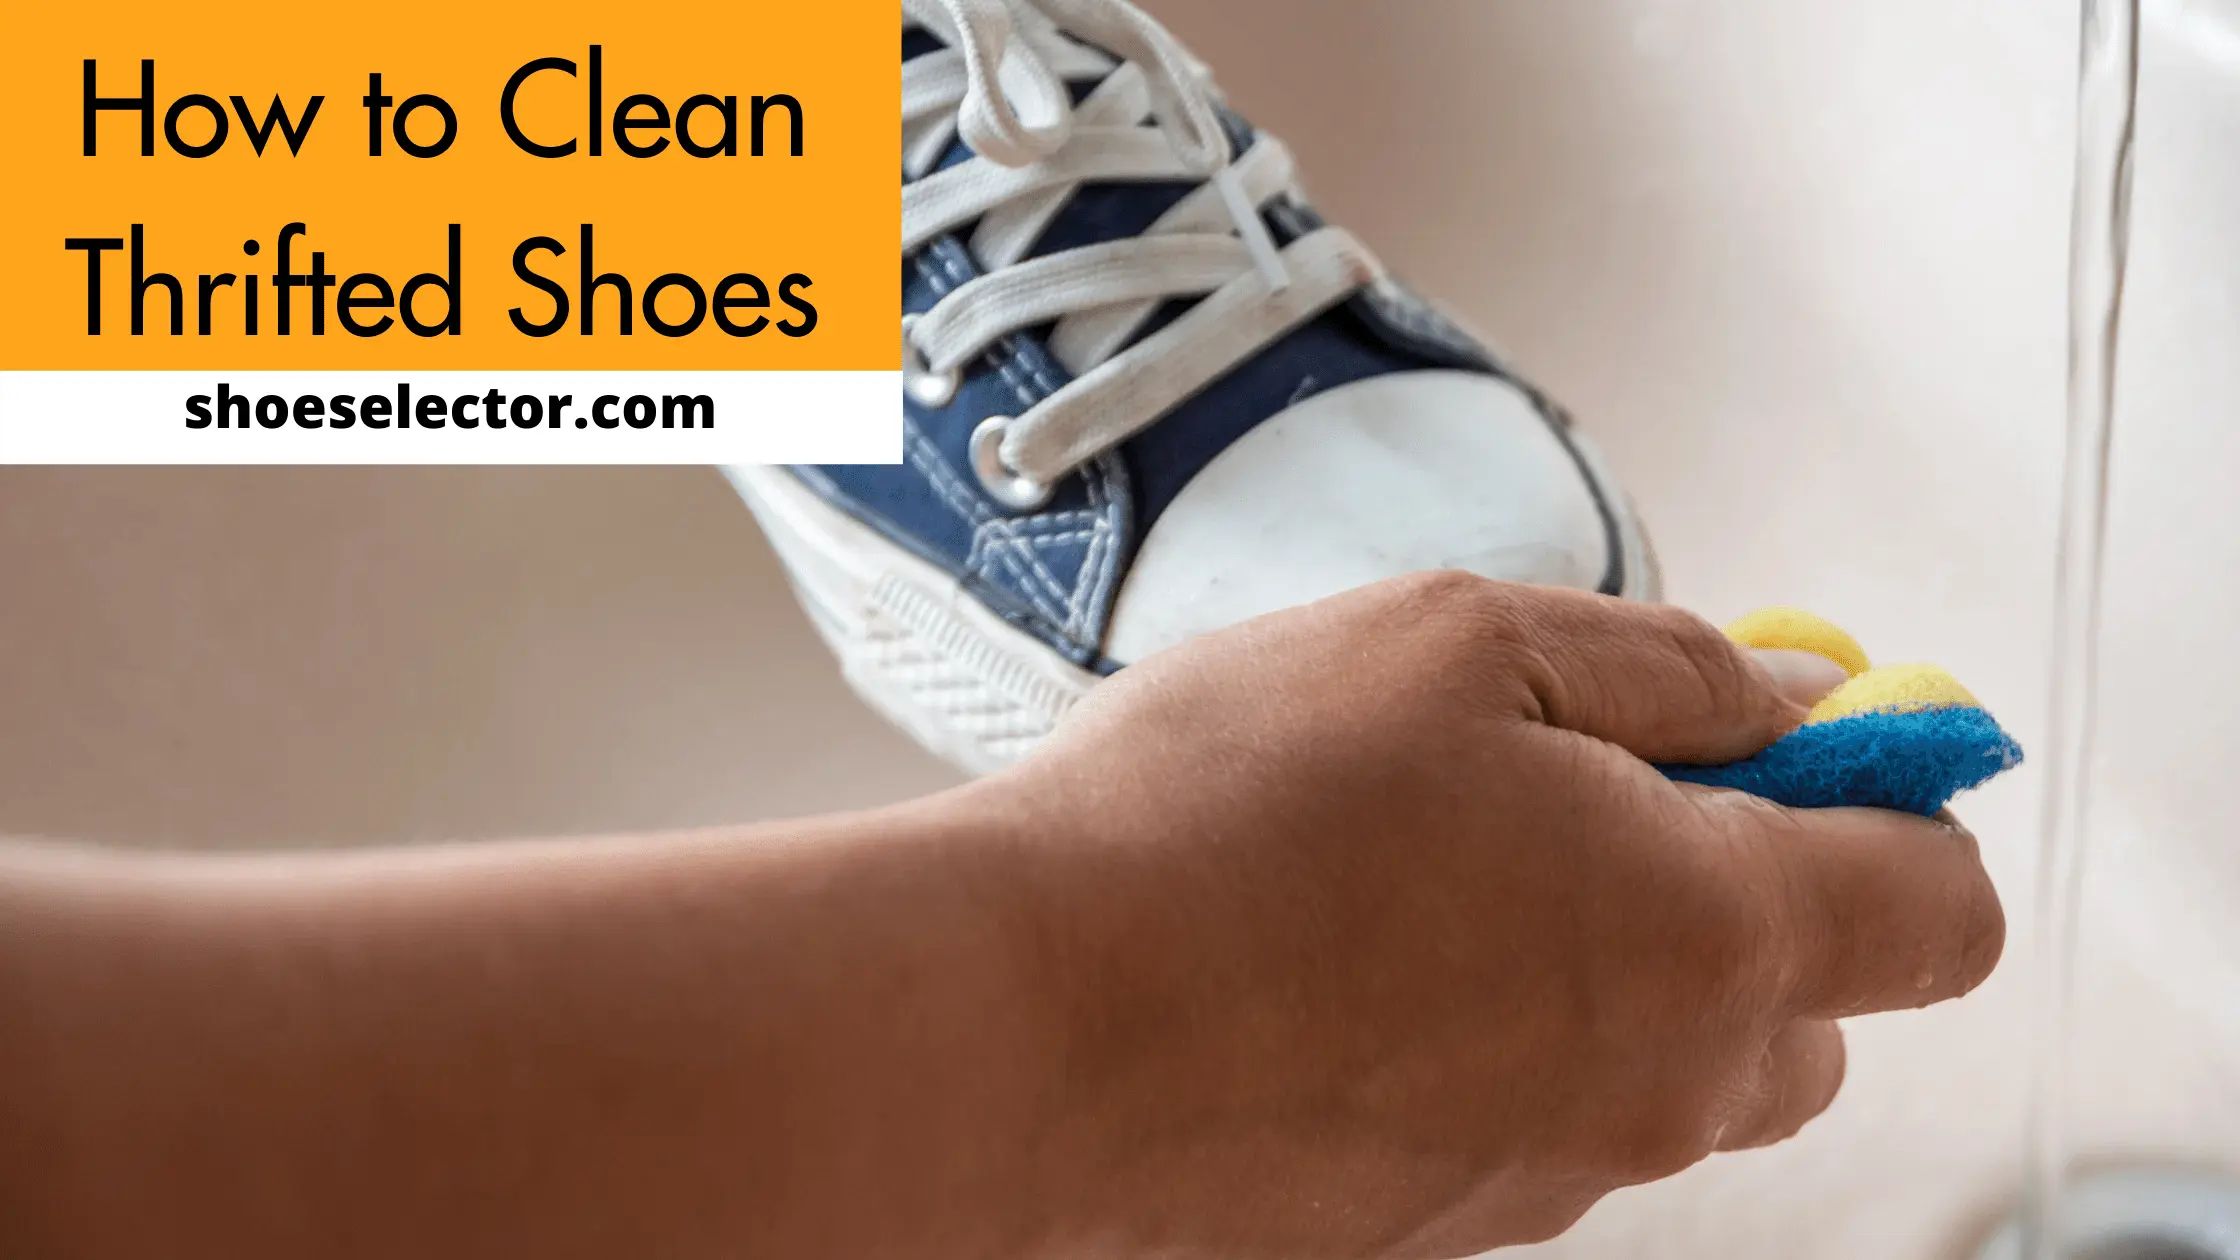 How to Clean Thrifted Shoes? - Comprehensive Guide